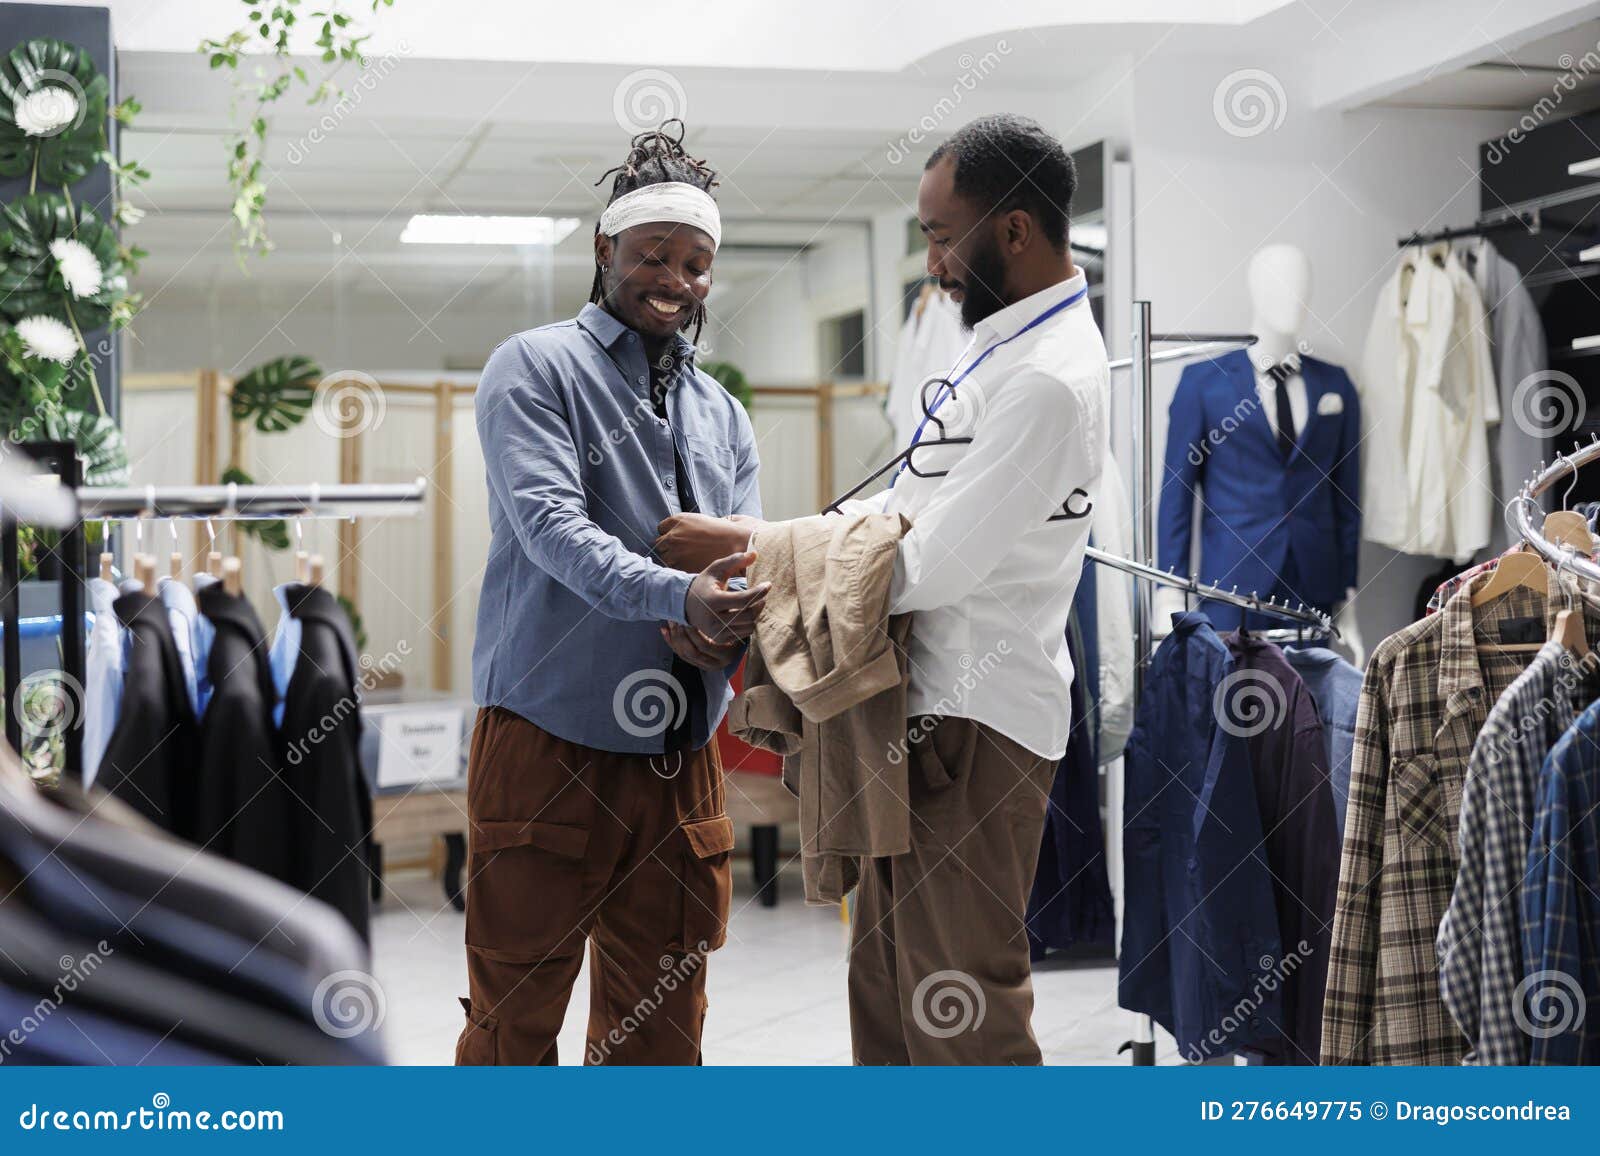 Smiling Man Trying on Shirt and Discussing with Salesperson Stock Image ...